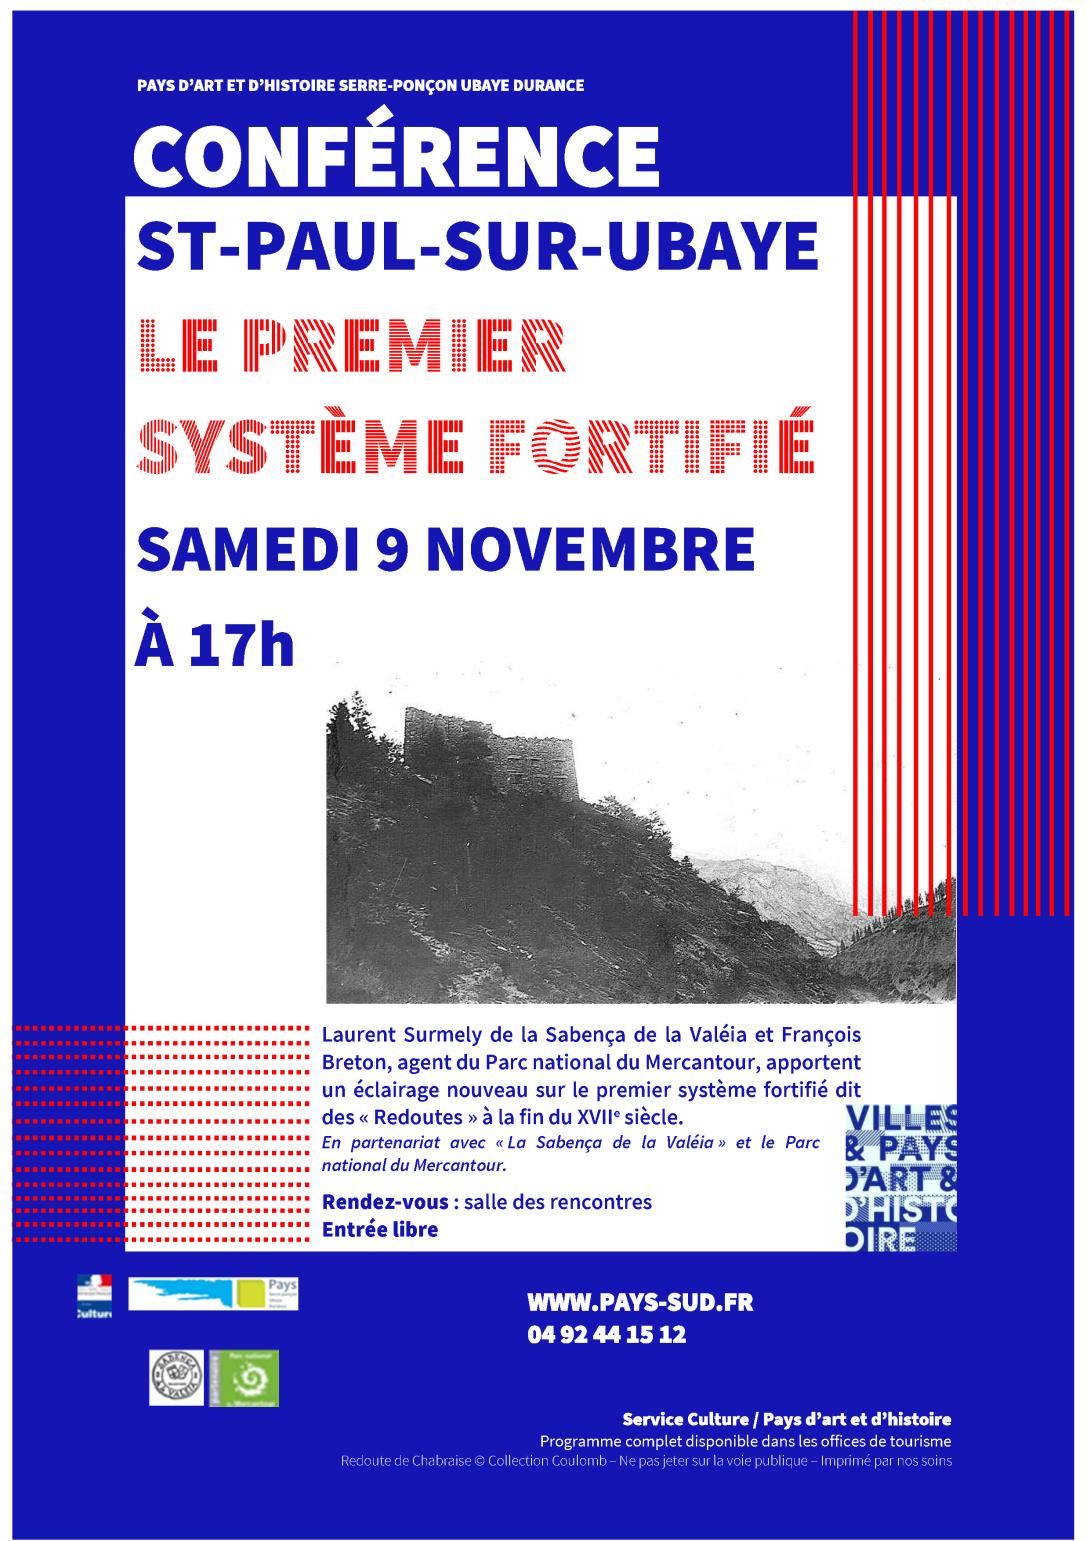 st_paul_conf_systeme_fortifie_2019.jpg